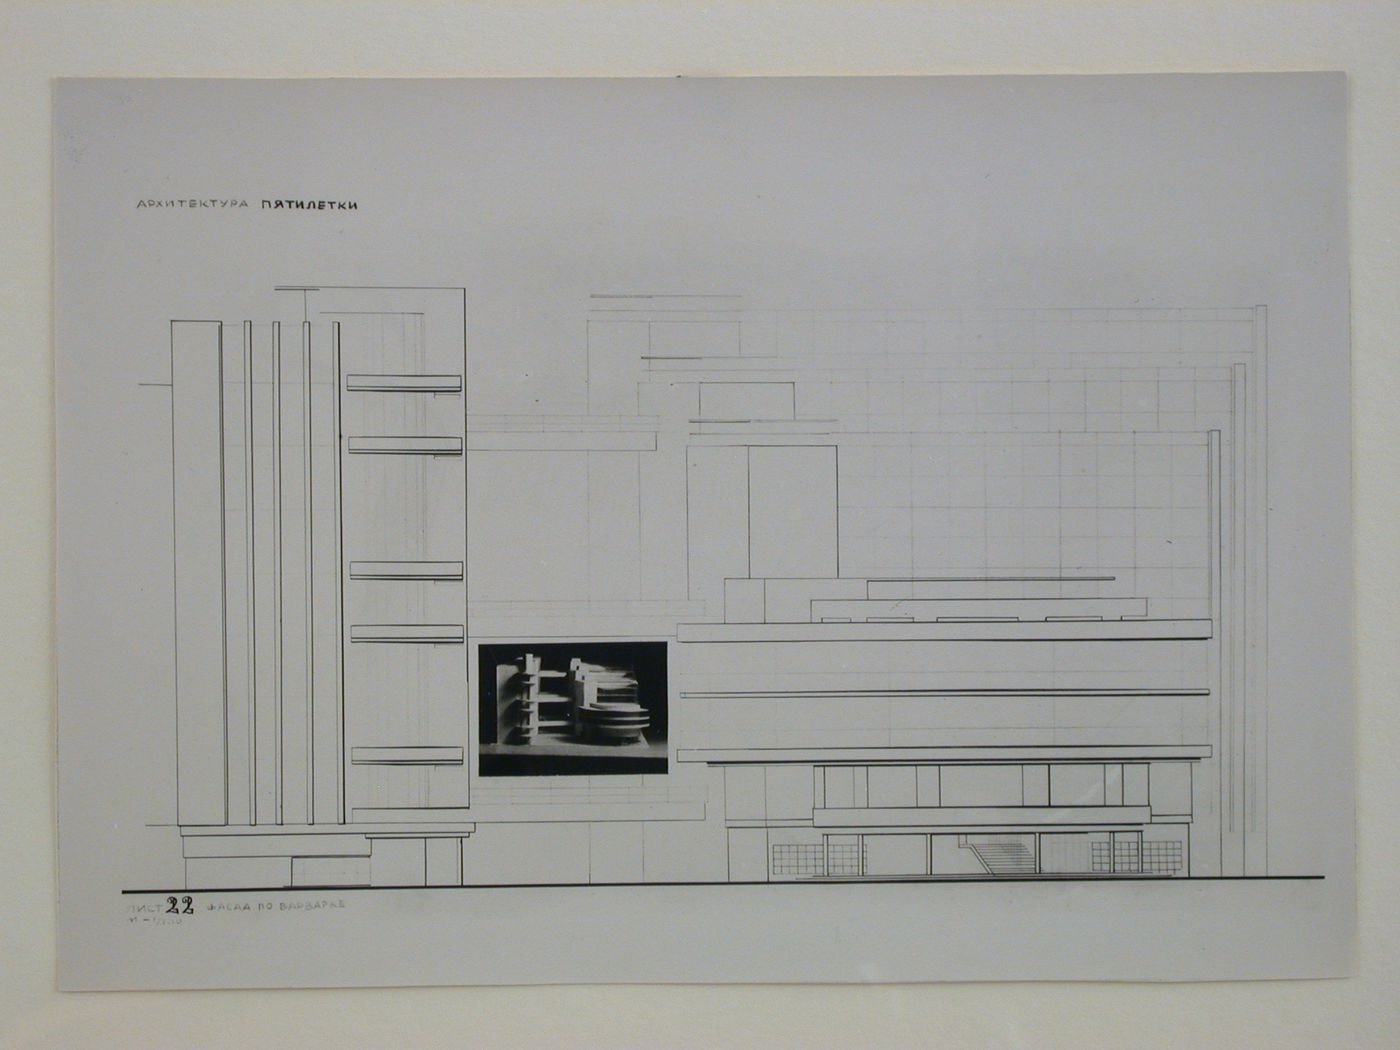 Photograph of an elevation and model for a Building of Industry showing the Varvarka Street façade, Moscow